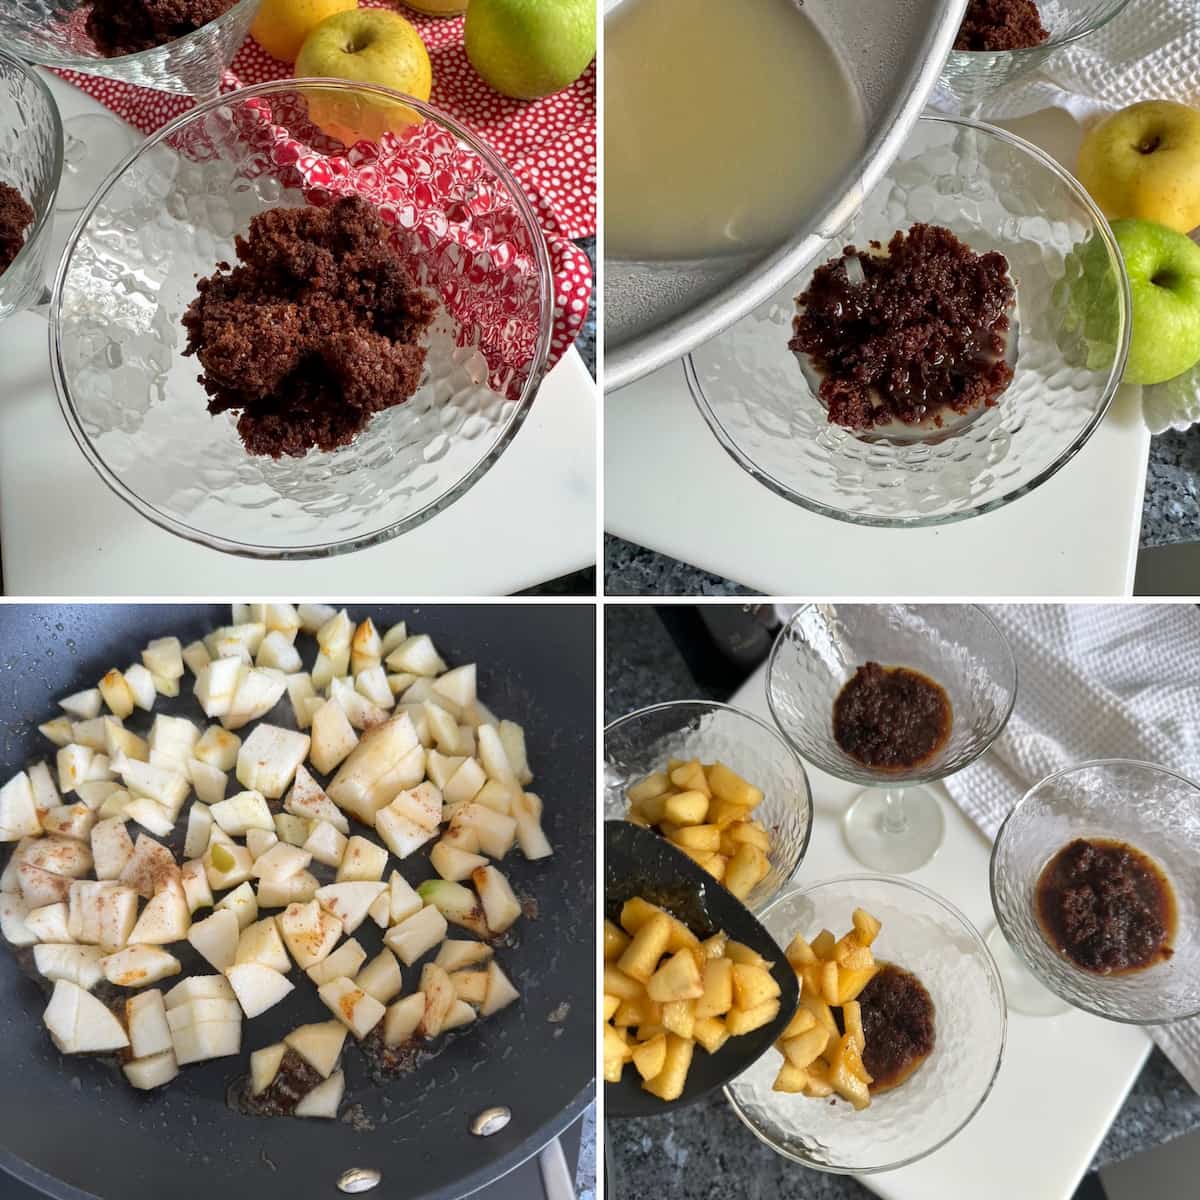 recipe steps to make individual desserts with jelly, cake and caramelised apples